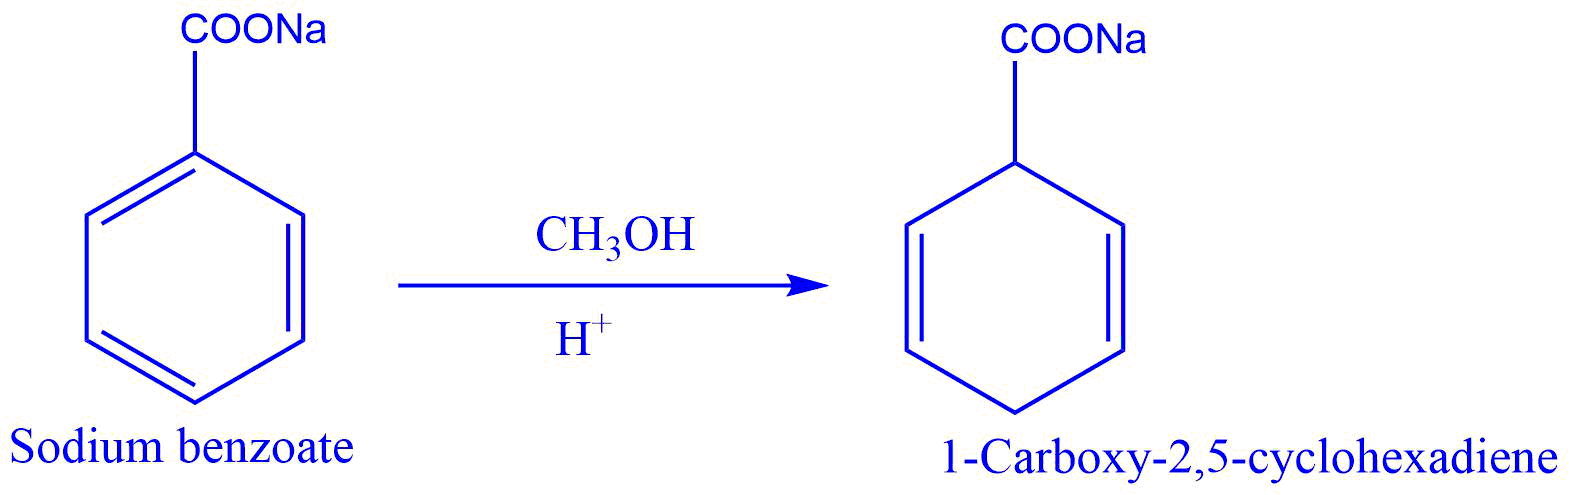 Reduction of sodium benzoate to 1-carboxy-2,5-cyclohexadiene